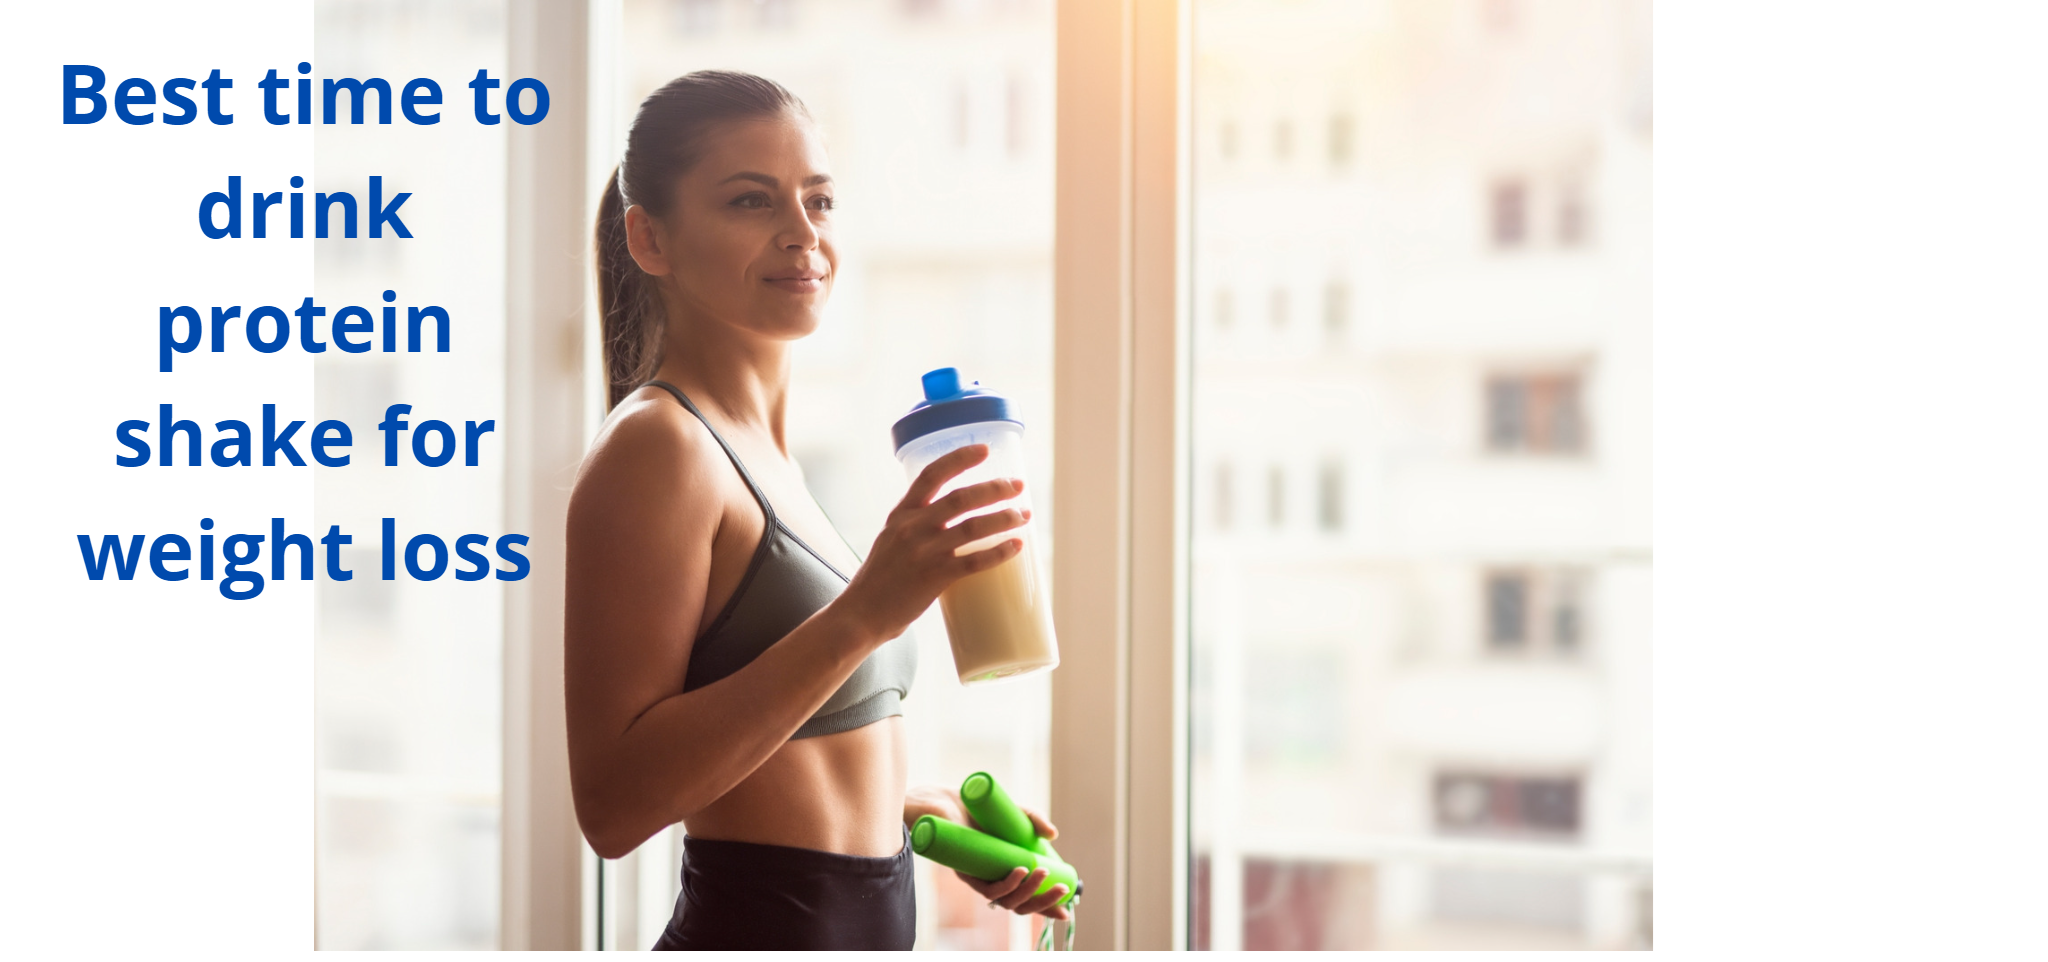 Best Time To Drink Protein Shake For Muscle Gain Weight Loss Better Performance